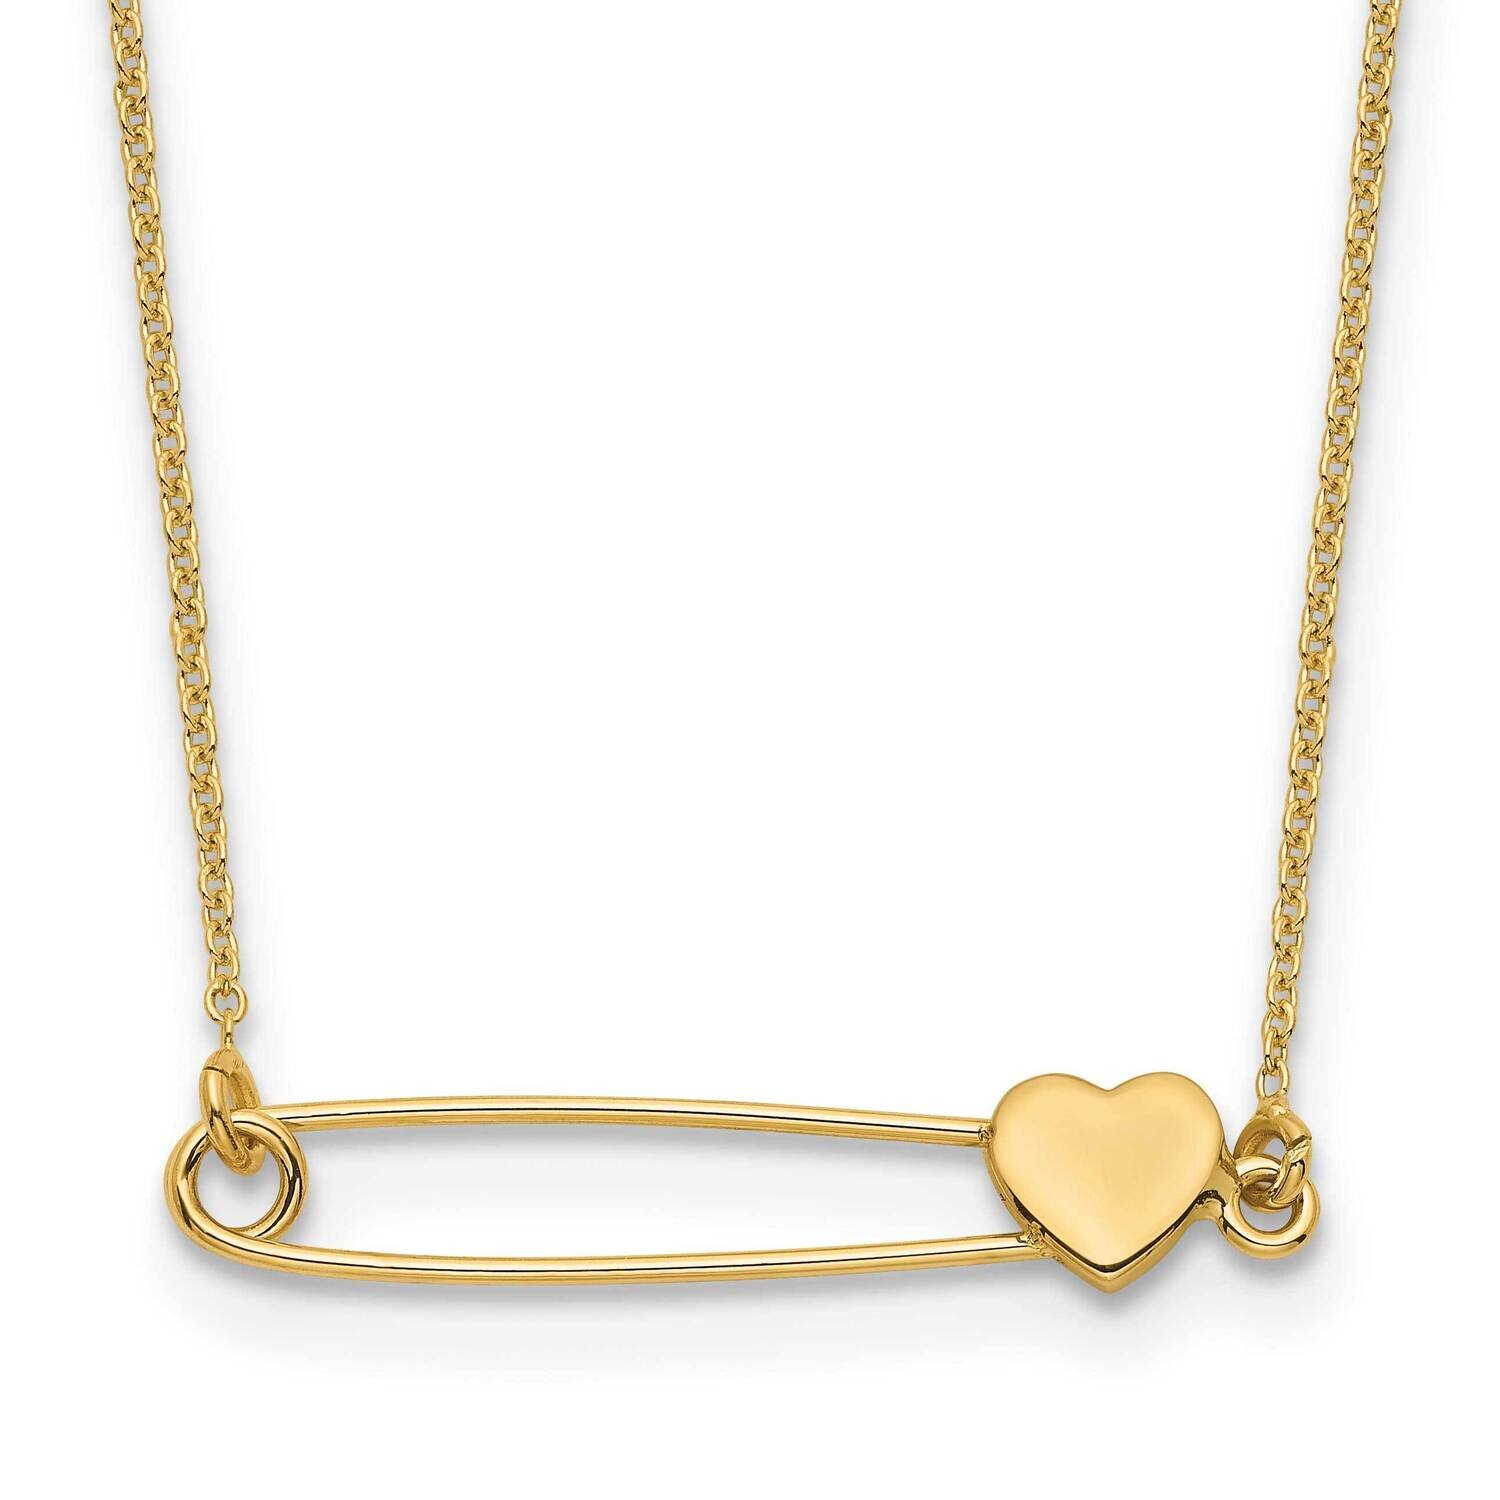 Safety Pin with Heart Necklace 17 Inch 14k Gold SF2877-17